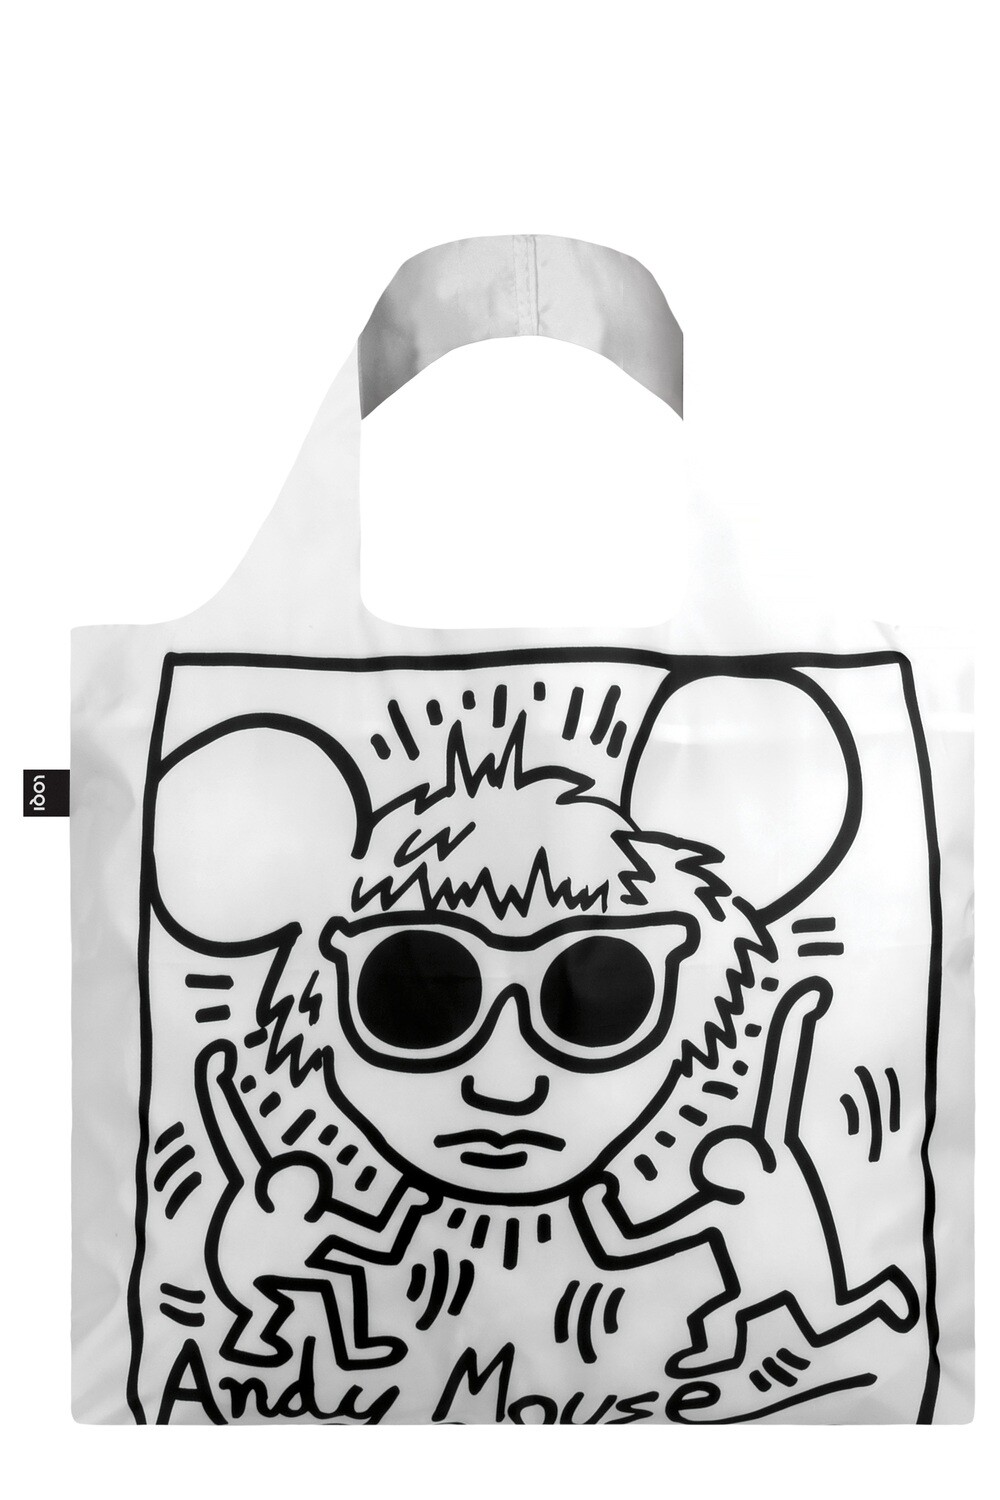 Bag Museum Col - Andy Mouse